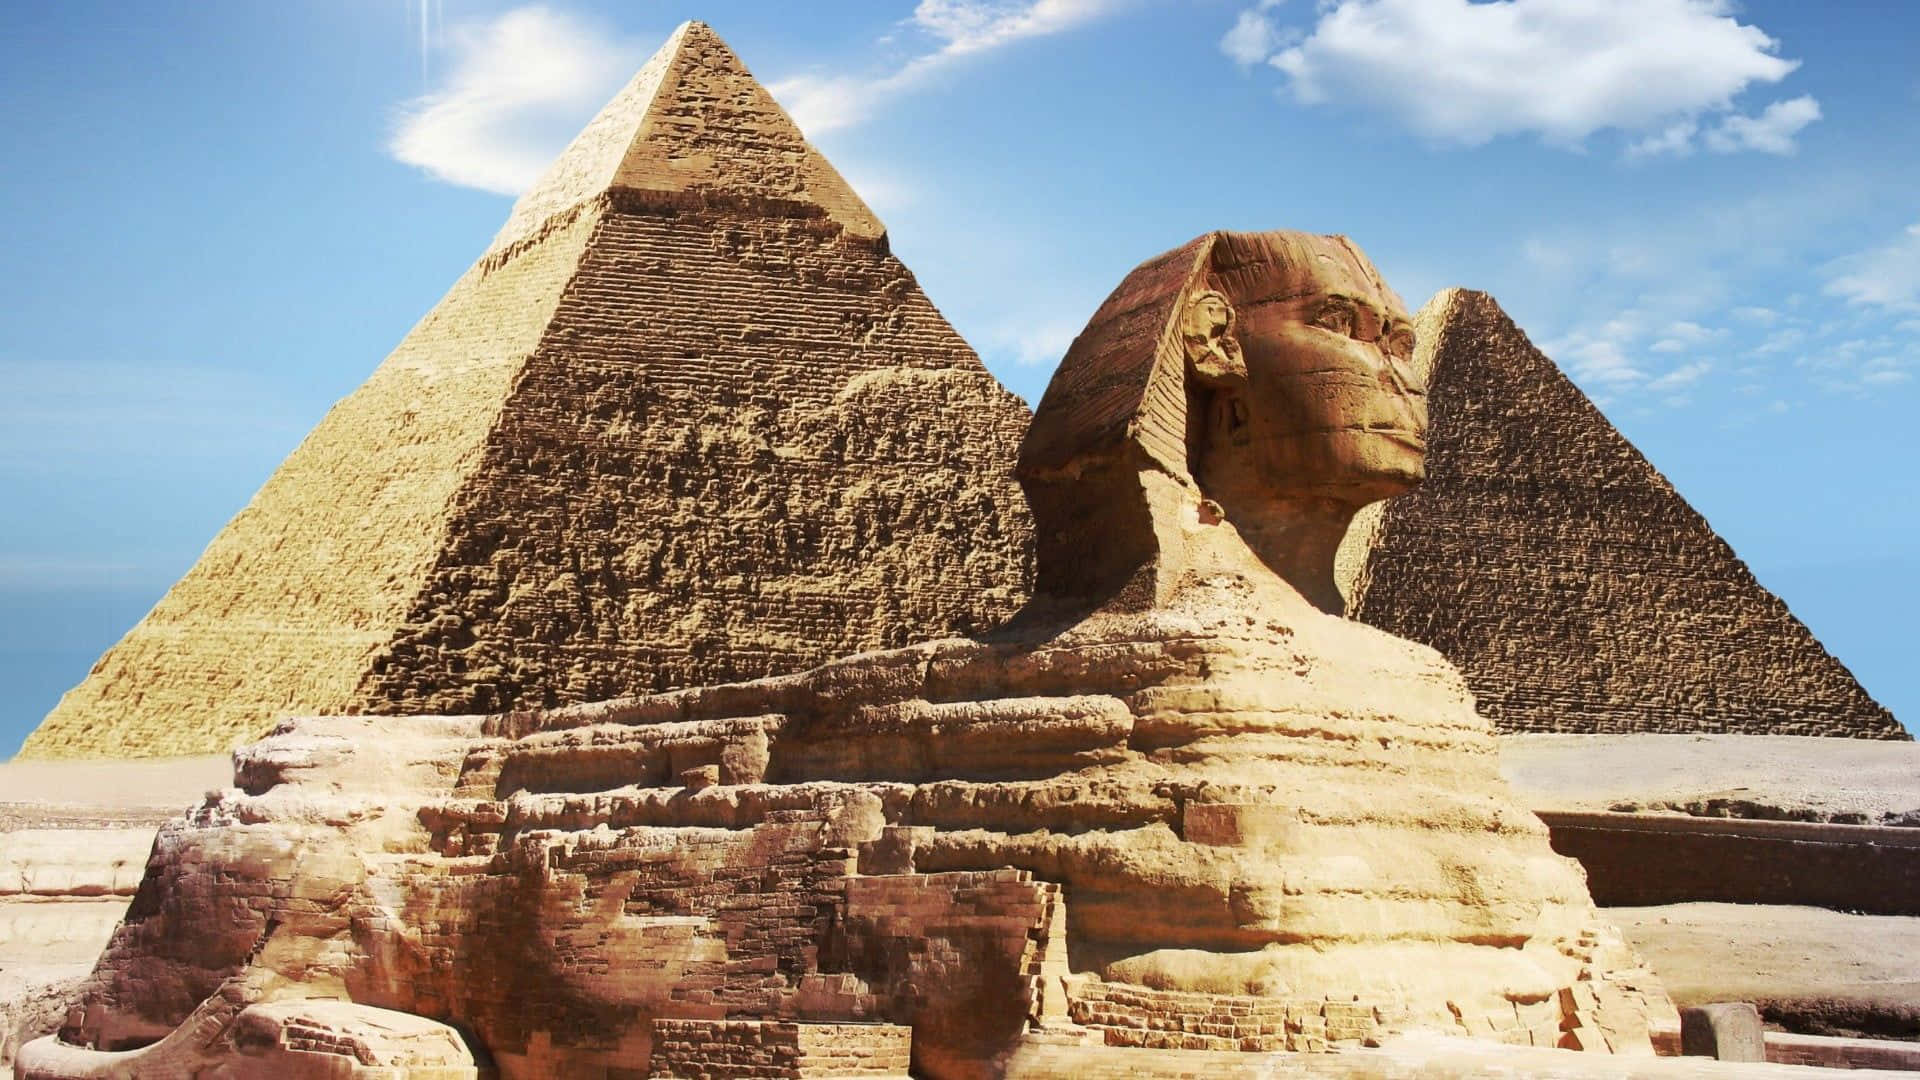 Giza Pyramids And The Great Sphinx Wallpaper